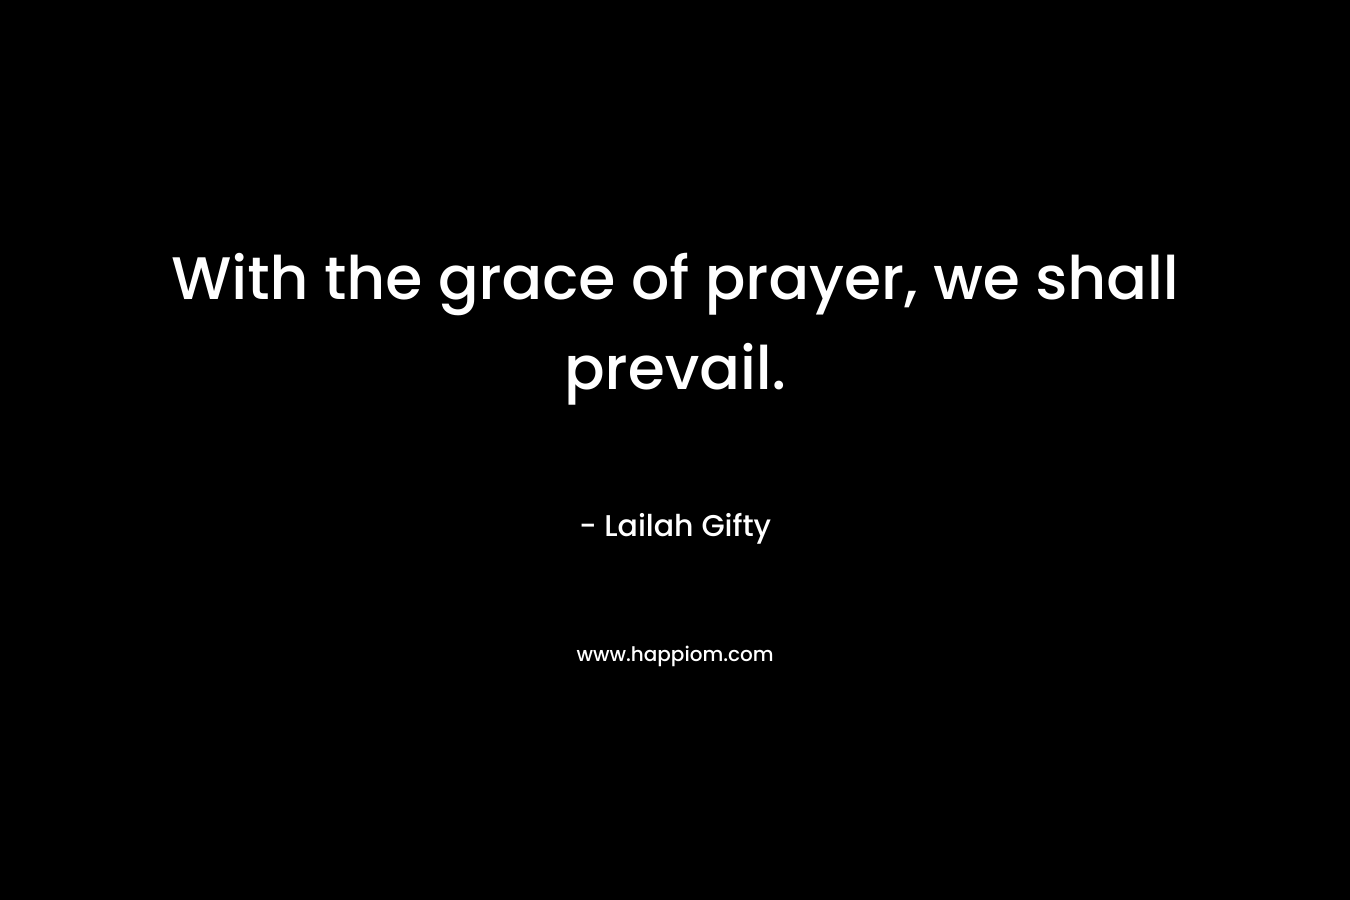 With the grace of prayer, we shall prevail. – Lailah Gifty